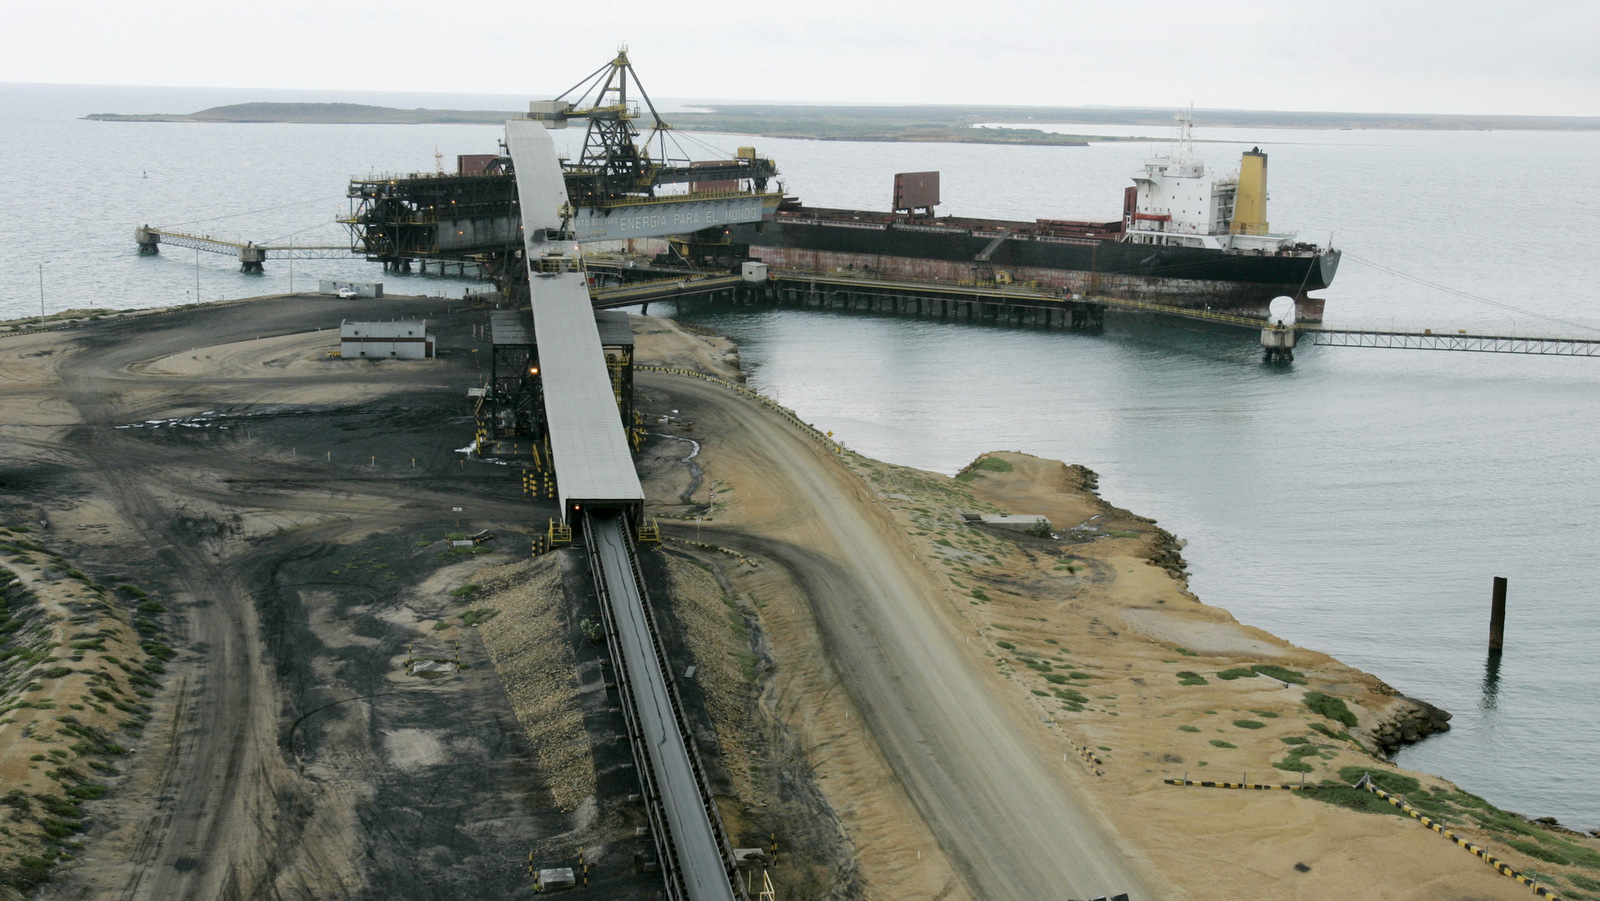 A freighter is docked at the Puerto Bolivar seaport, in the Guajira peninsula in northern Colombia. All the coal produced at Cerrejon, the world's biggest open-pit export coal mine, is shipped by train to Puerto Bolivar, where it is loaded onto freighters bound for Europe and America. (AP/Ricardo Mazalan)